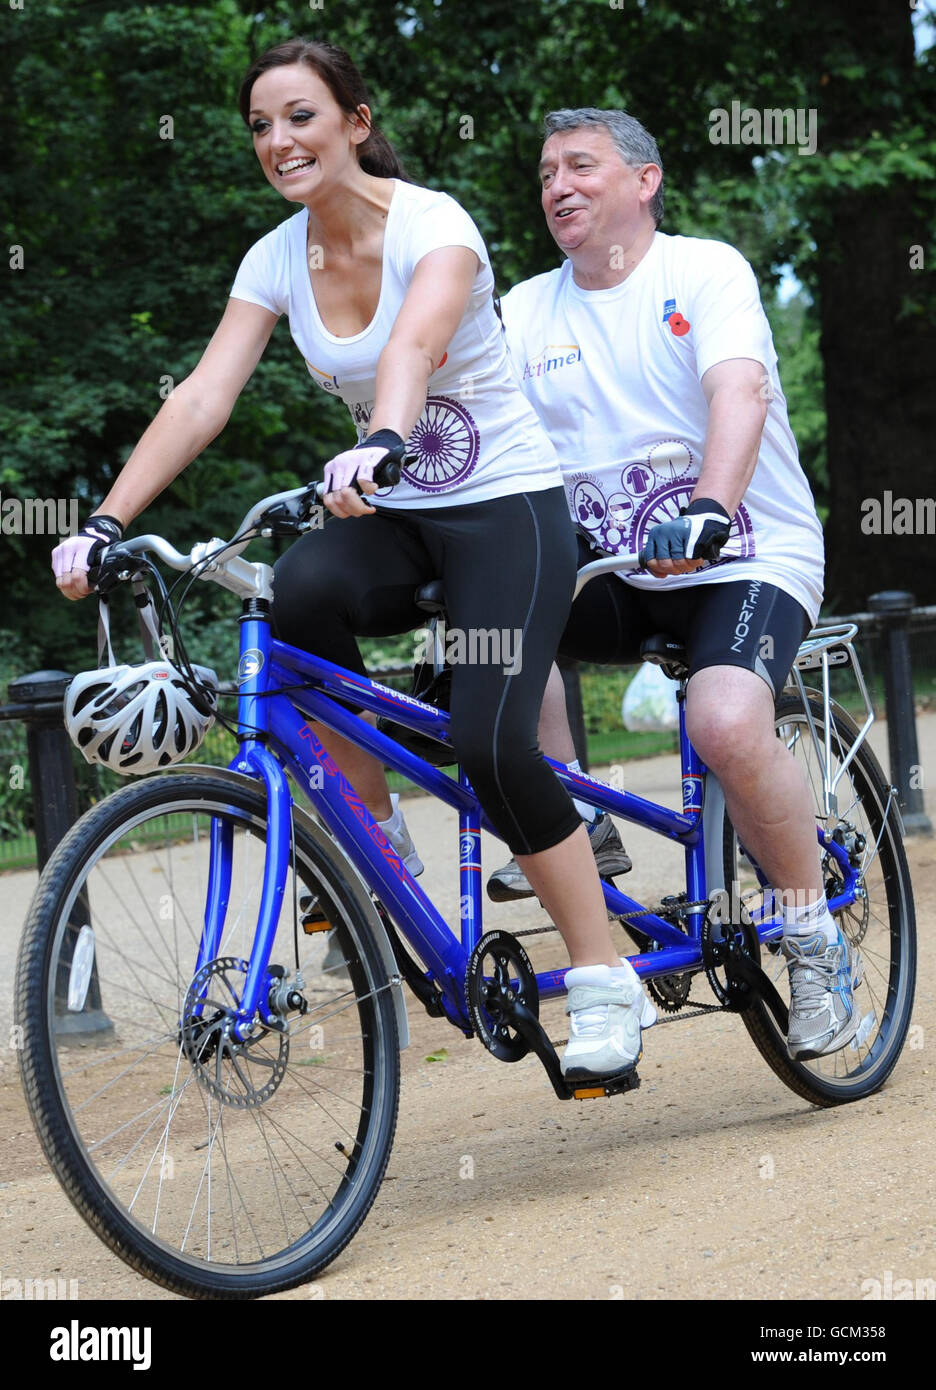 Miss England Lance Corporal Katrina Hodge and former England football manager Graham Taylor launch the annual Royal British Legion Pedal to Paris bike ride, on a tandem bicycle, in London. Stock Photo